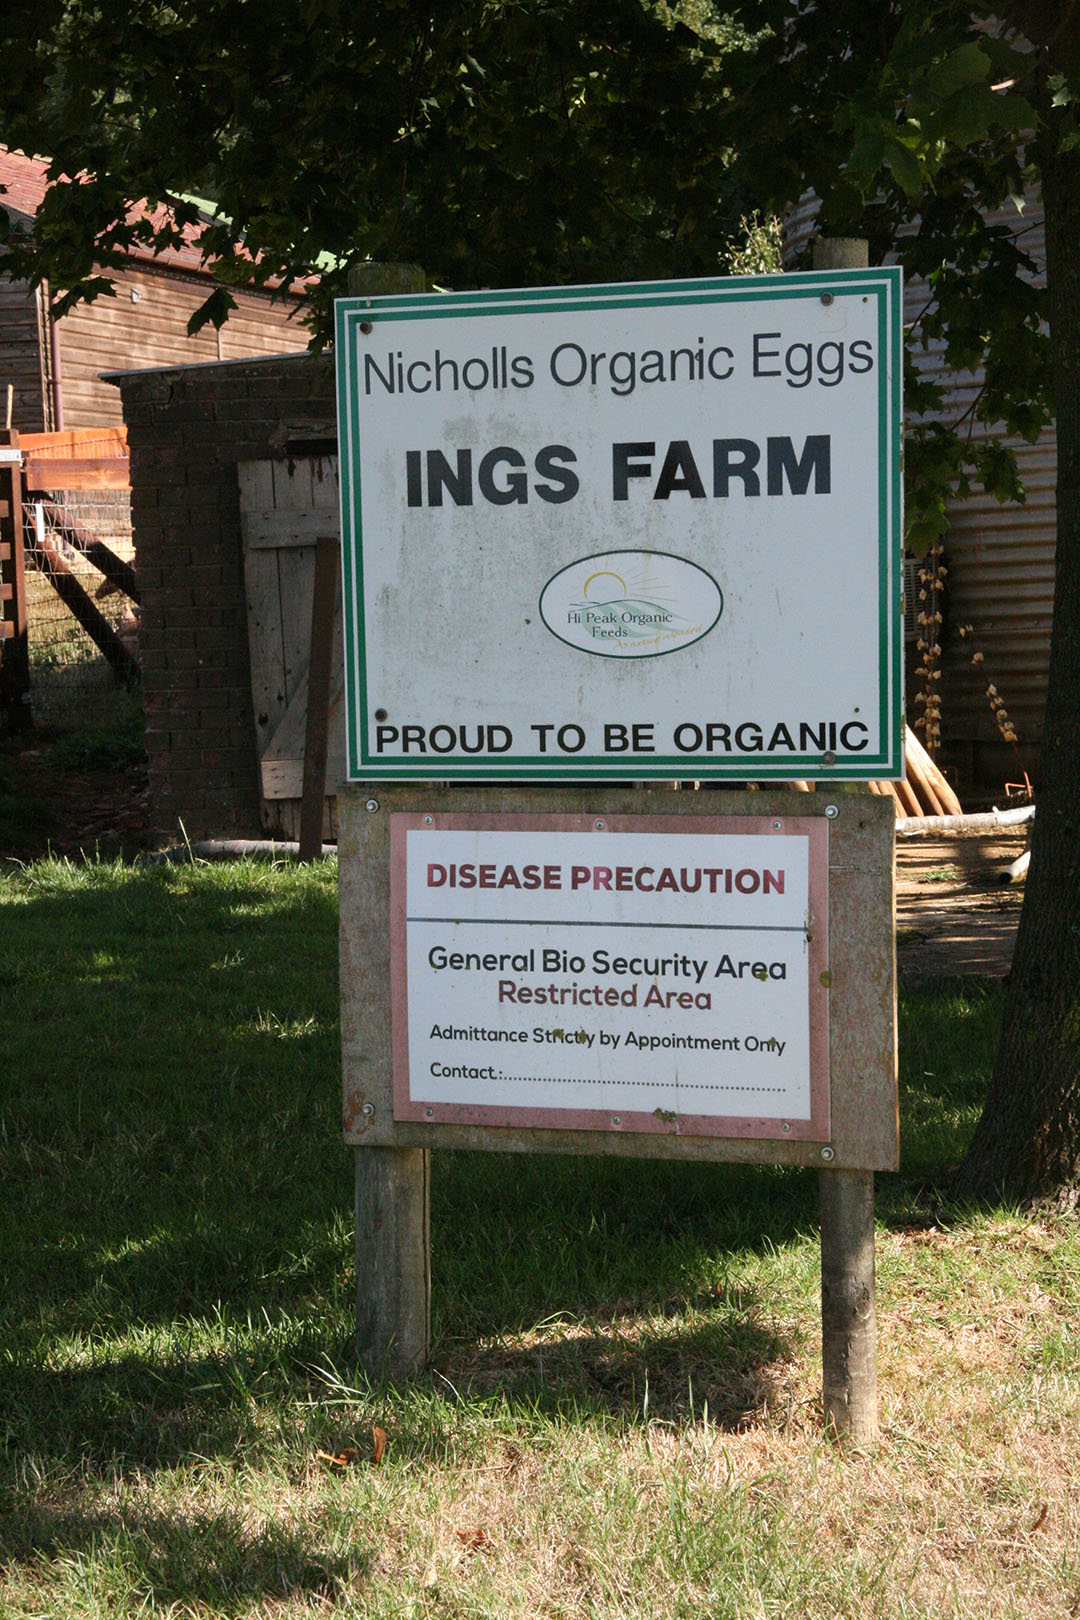 The Nicholls farm escaped most of the avian influenza prevention measures, but housing orders were in place for some time.